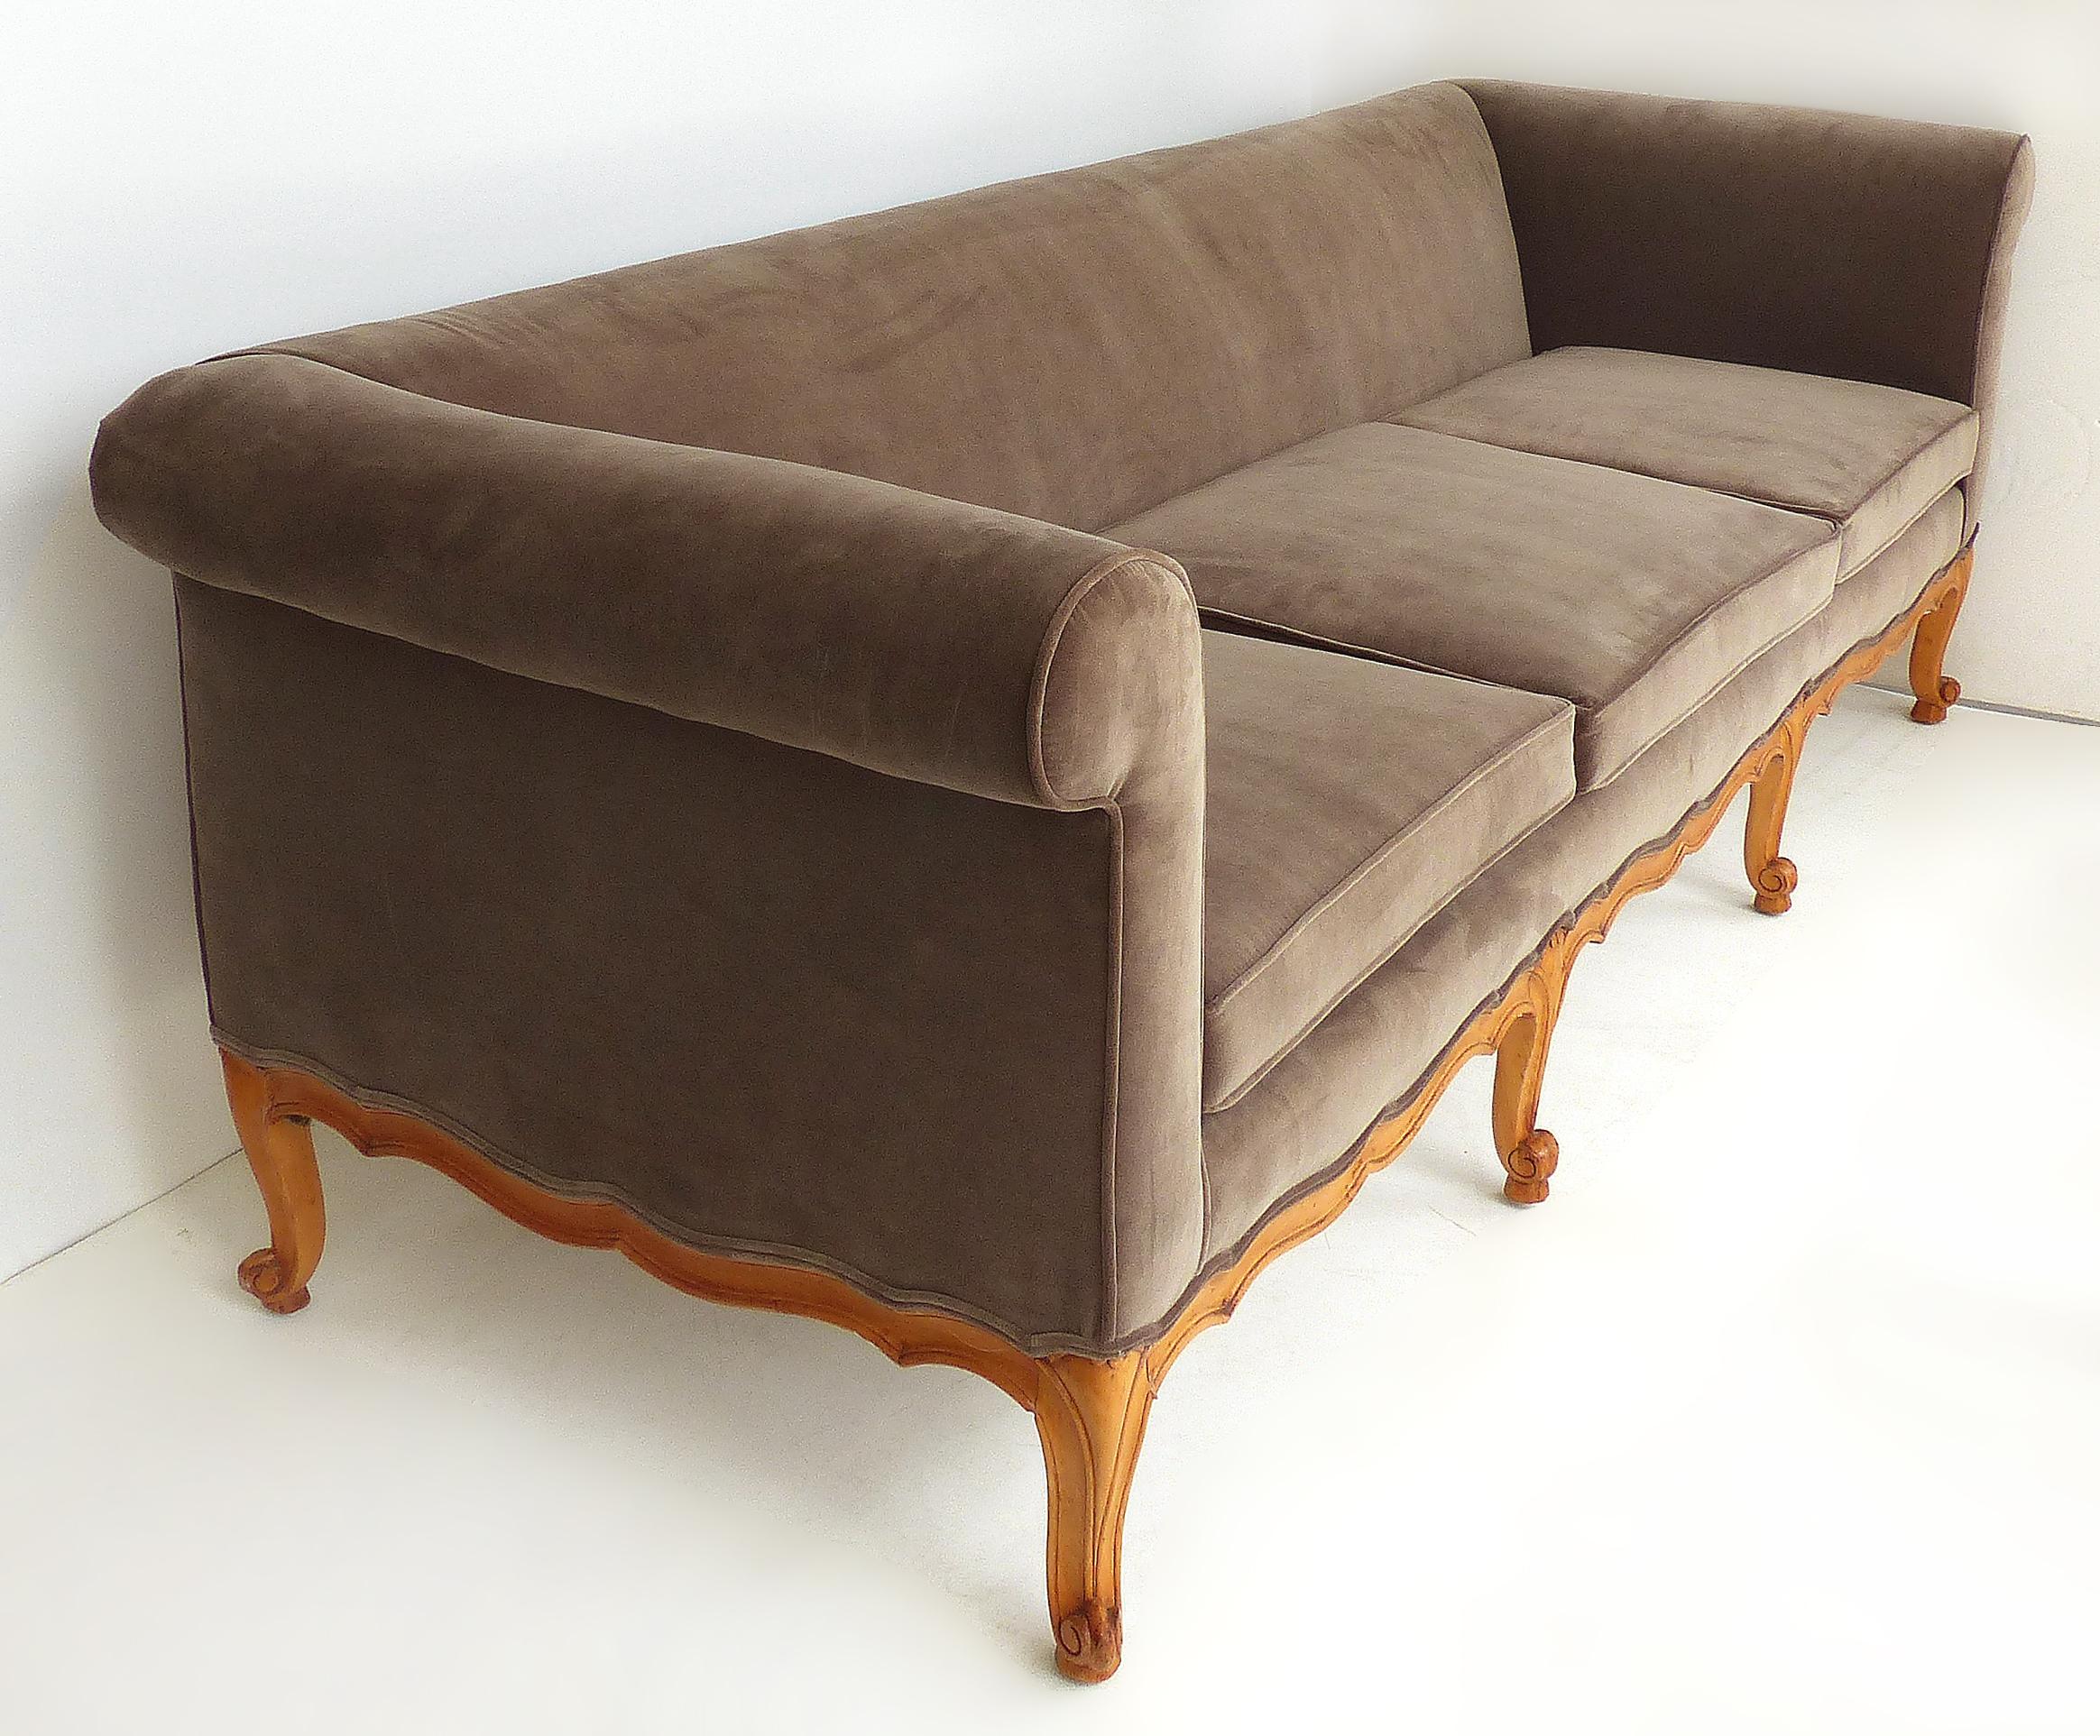 1950s Louis XV style mohair newly upholstered sofa with scalloped wood apron

Offered for sale is a Louis XV style sofa upholstered in mohair velvet. The circa 1950s sofa has a scalloped wood apron and we are also showing a photograph of an